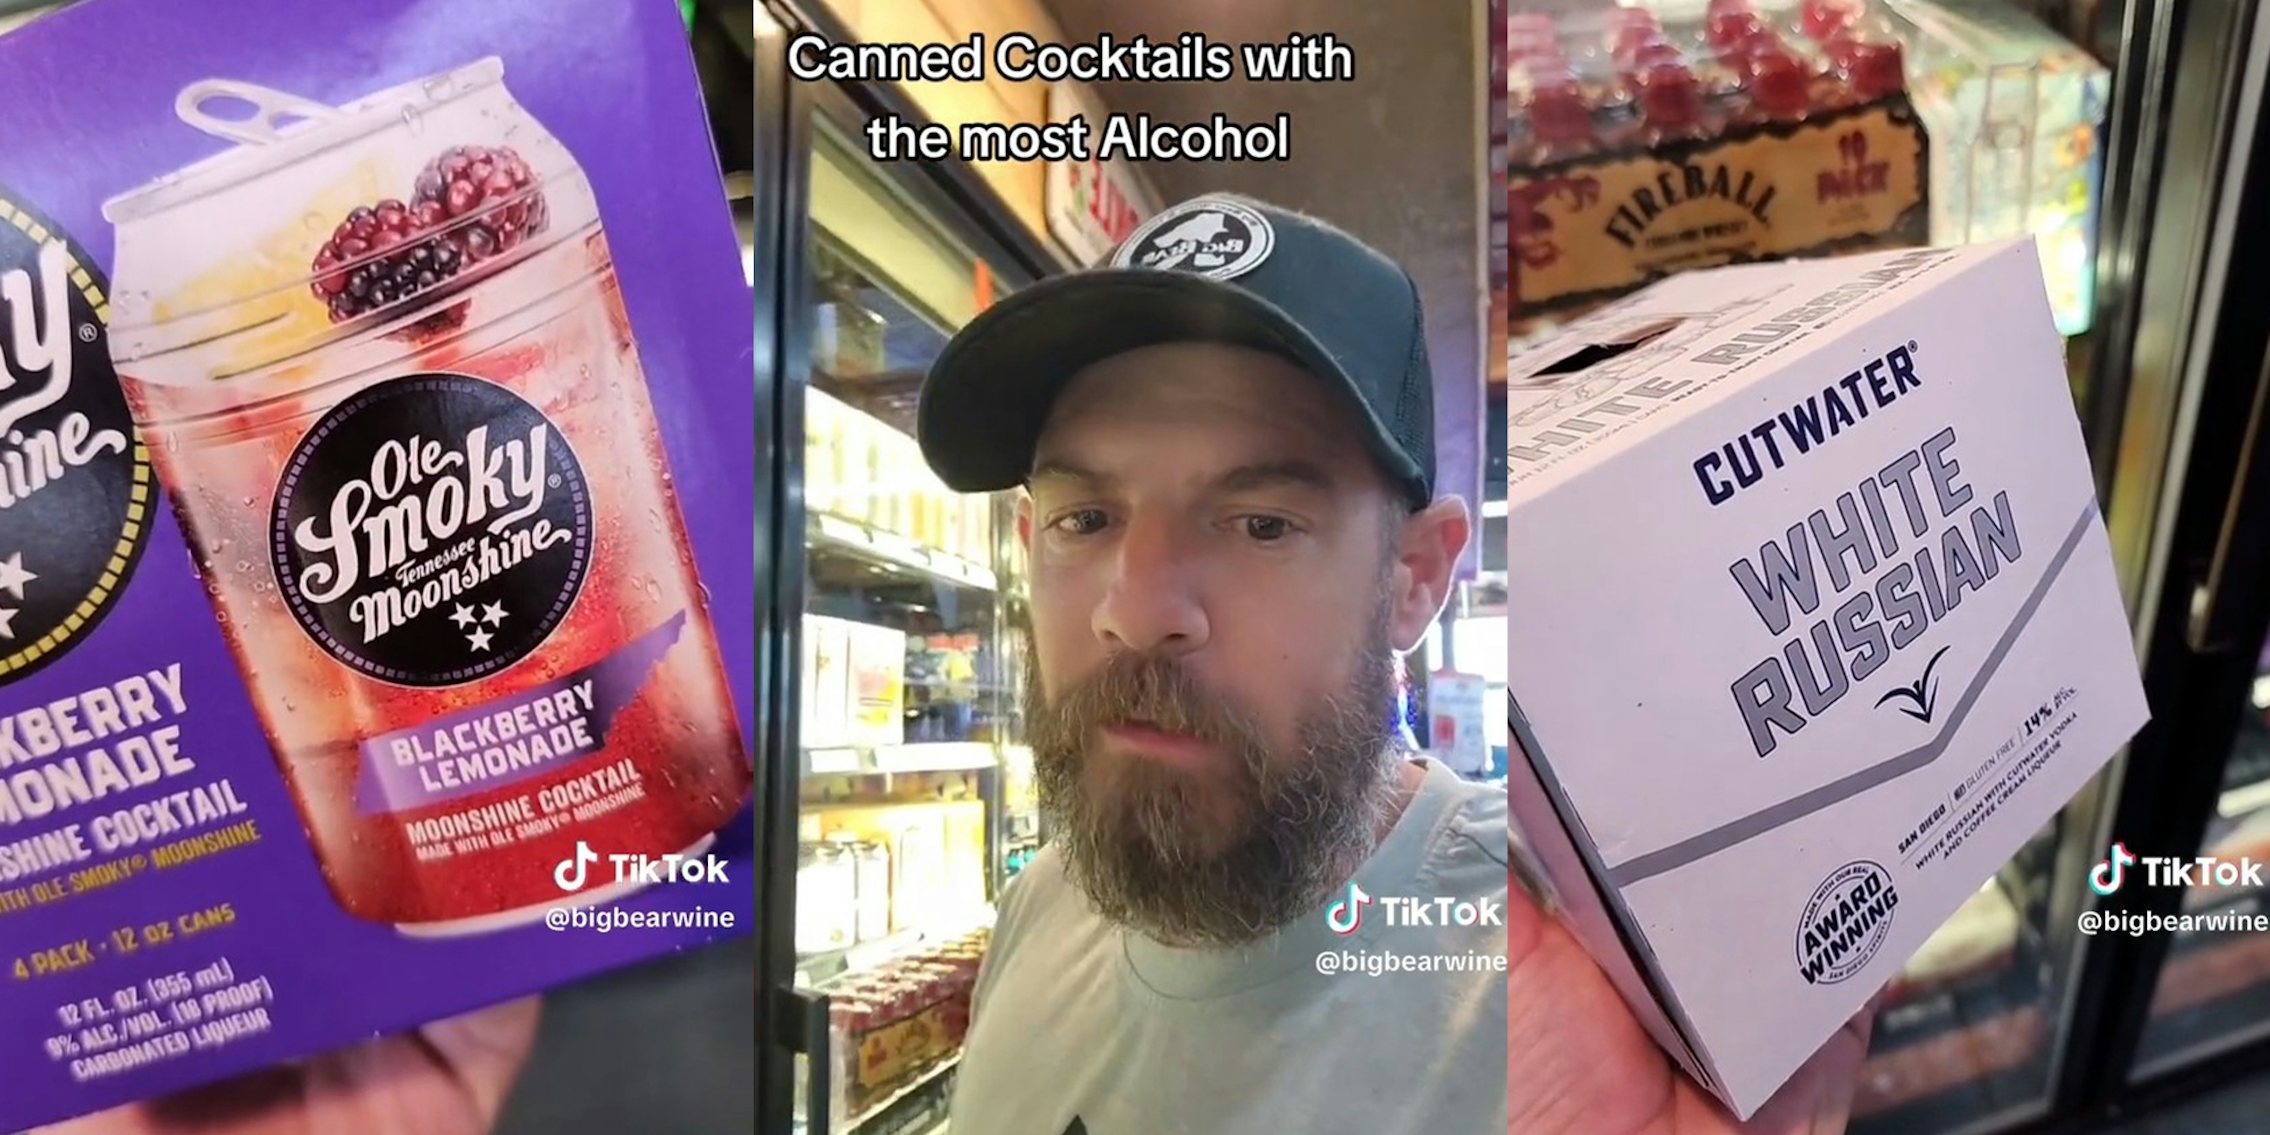 Liquor store owner shows the 5 canned cocktails with the most alcohol